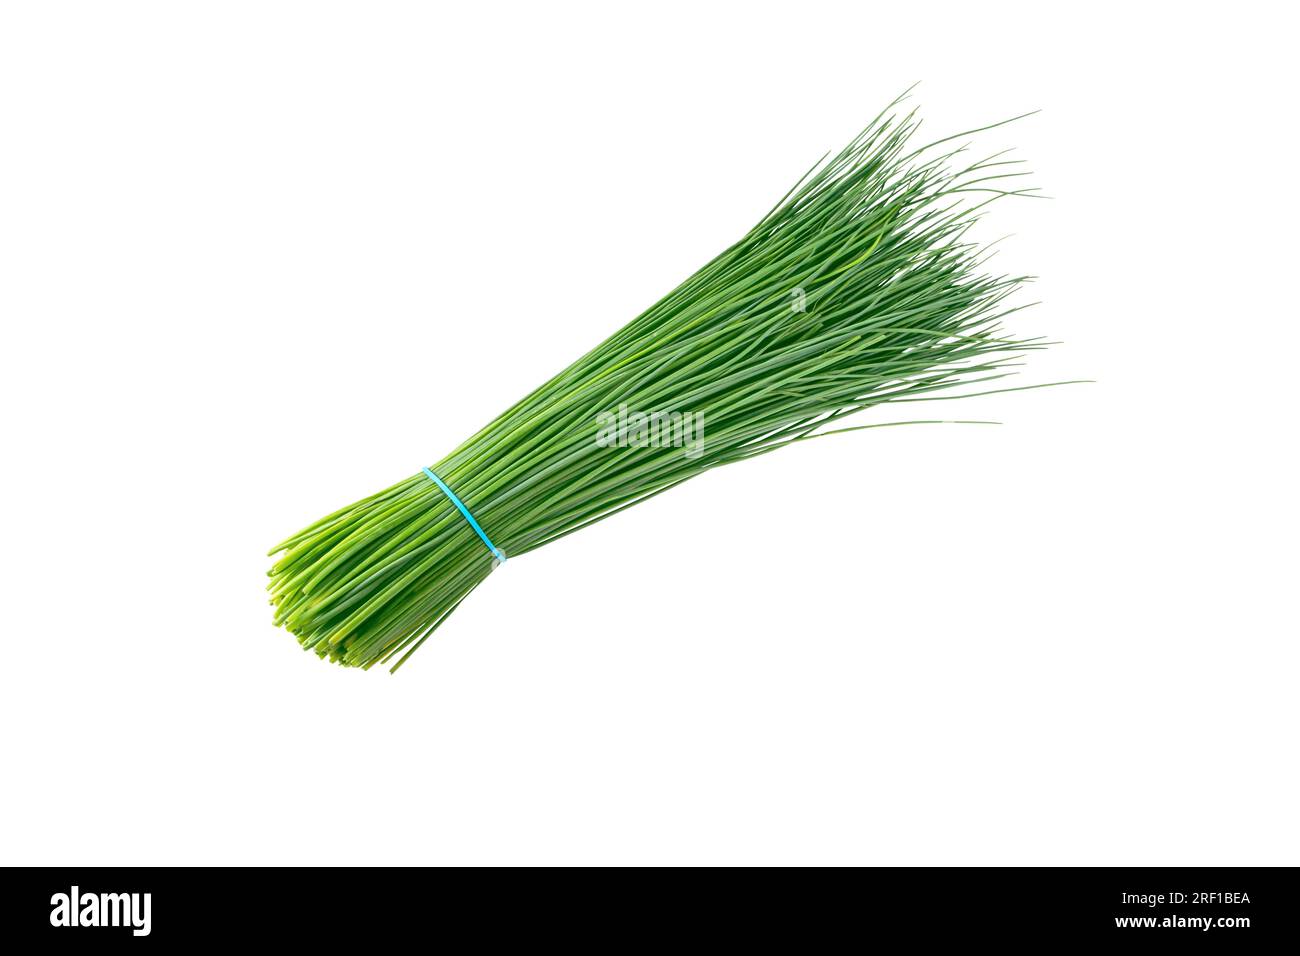 Green chives leaves vegetable bunch tied with blue rubber band isolated on white. Allium schoenoprasum. Stock Photo